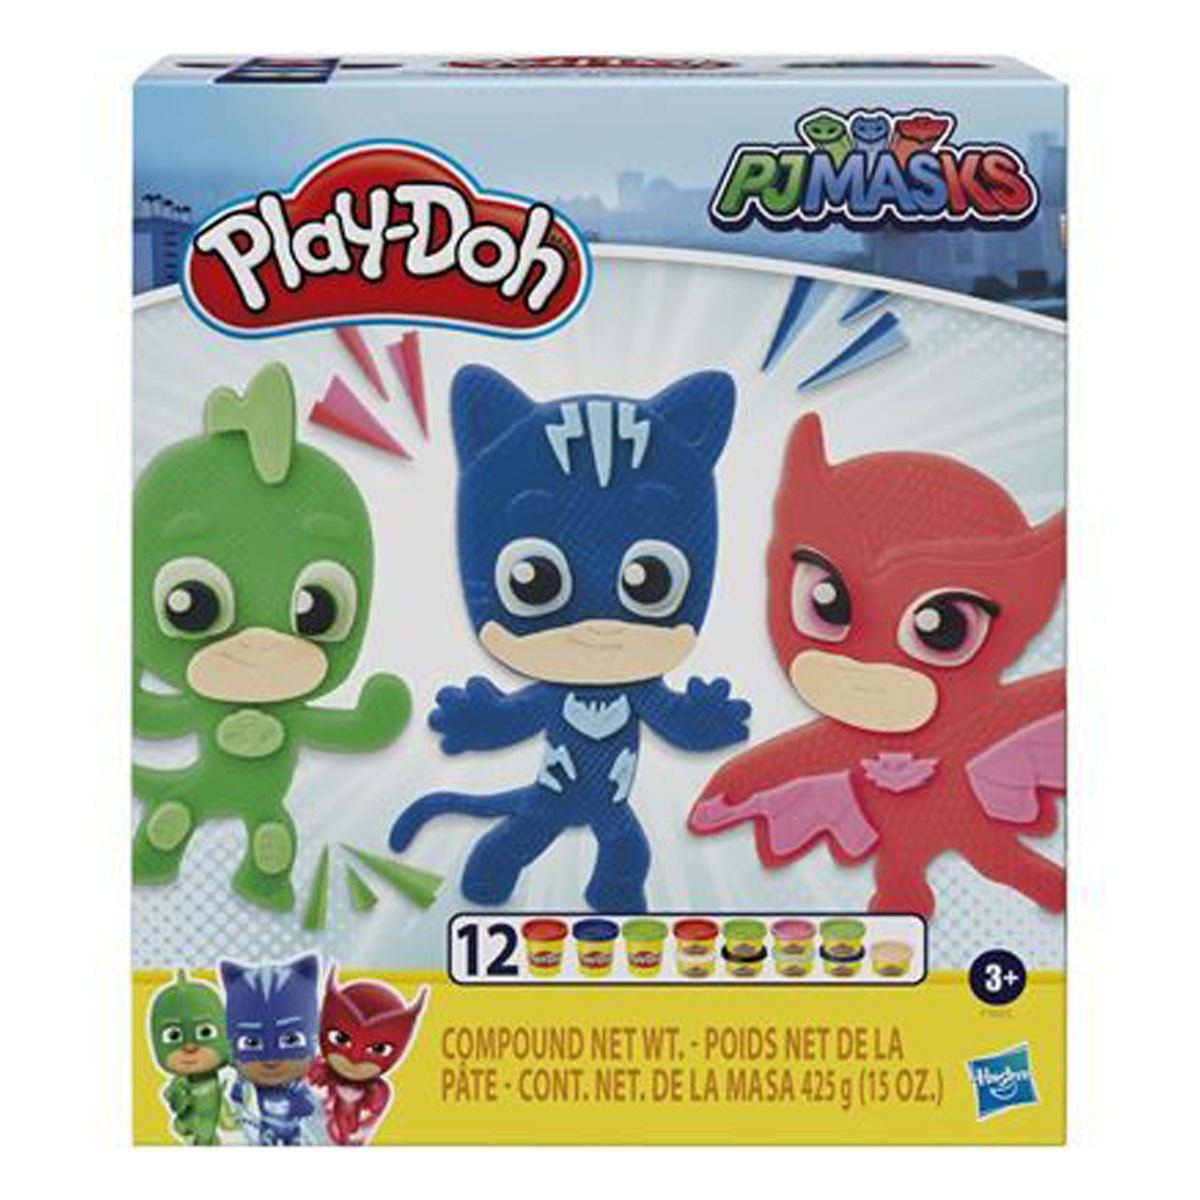 Playdoh PJ Masks Hero Set Art And Crafts Activity Toy for Kids, F1805